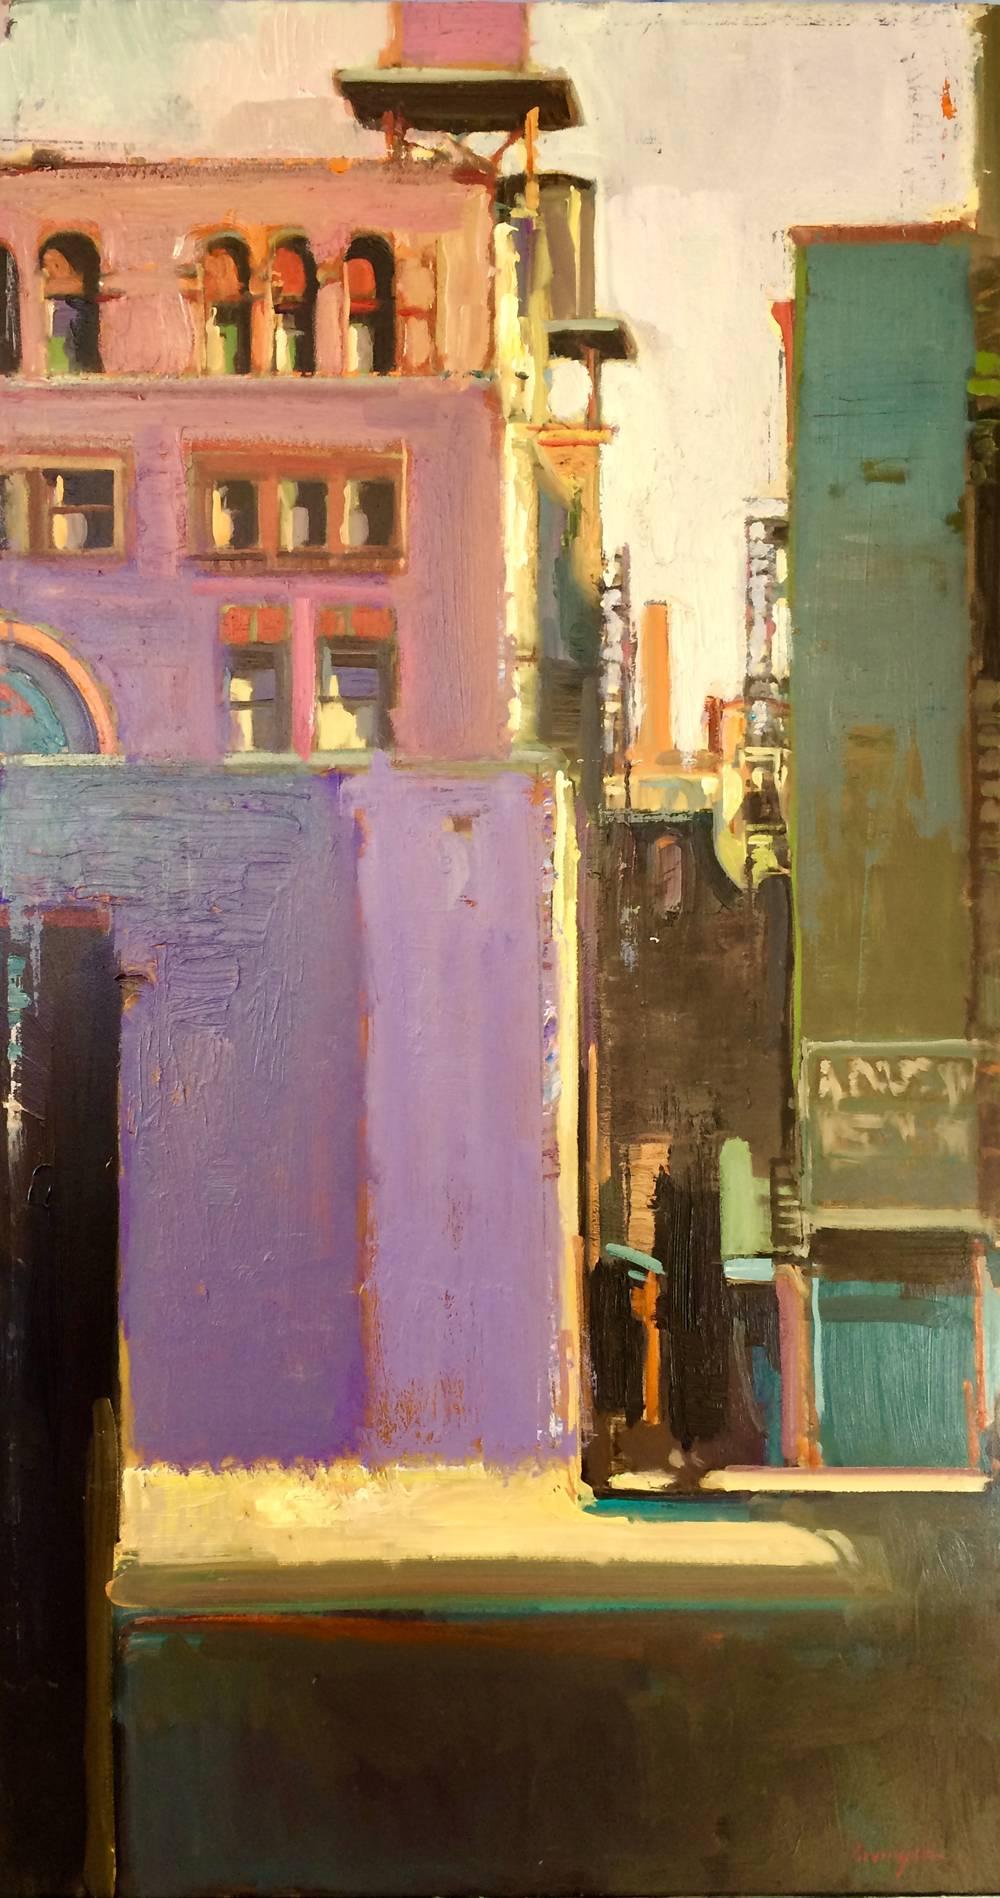 DEEP ALLEY - Painting by Francis Livingston